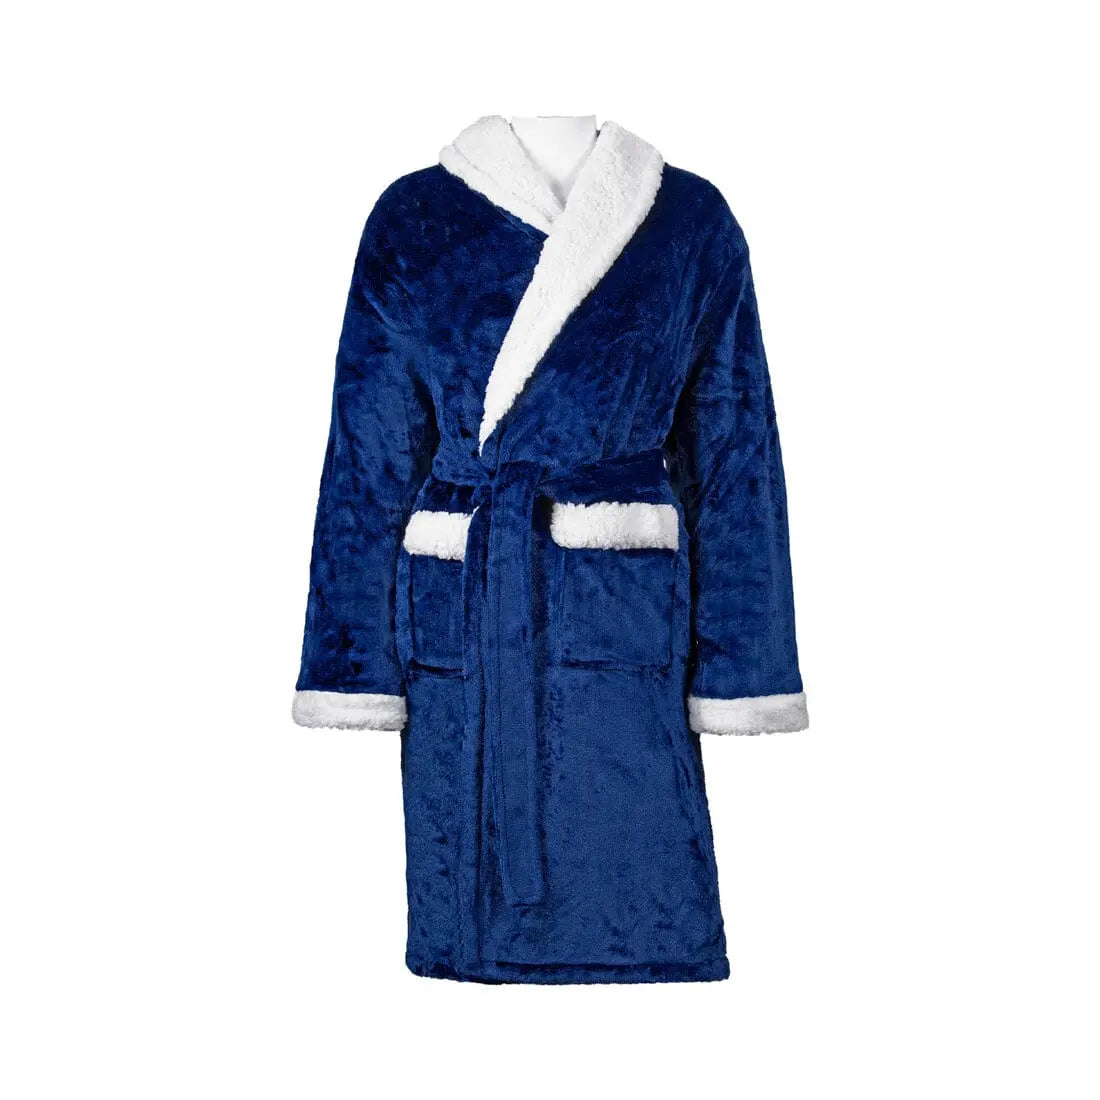 Personalised Back of Robe Sherpa Fleece Dressing Gown   